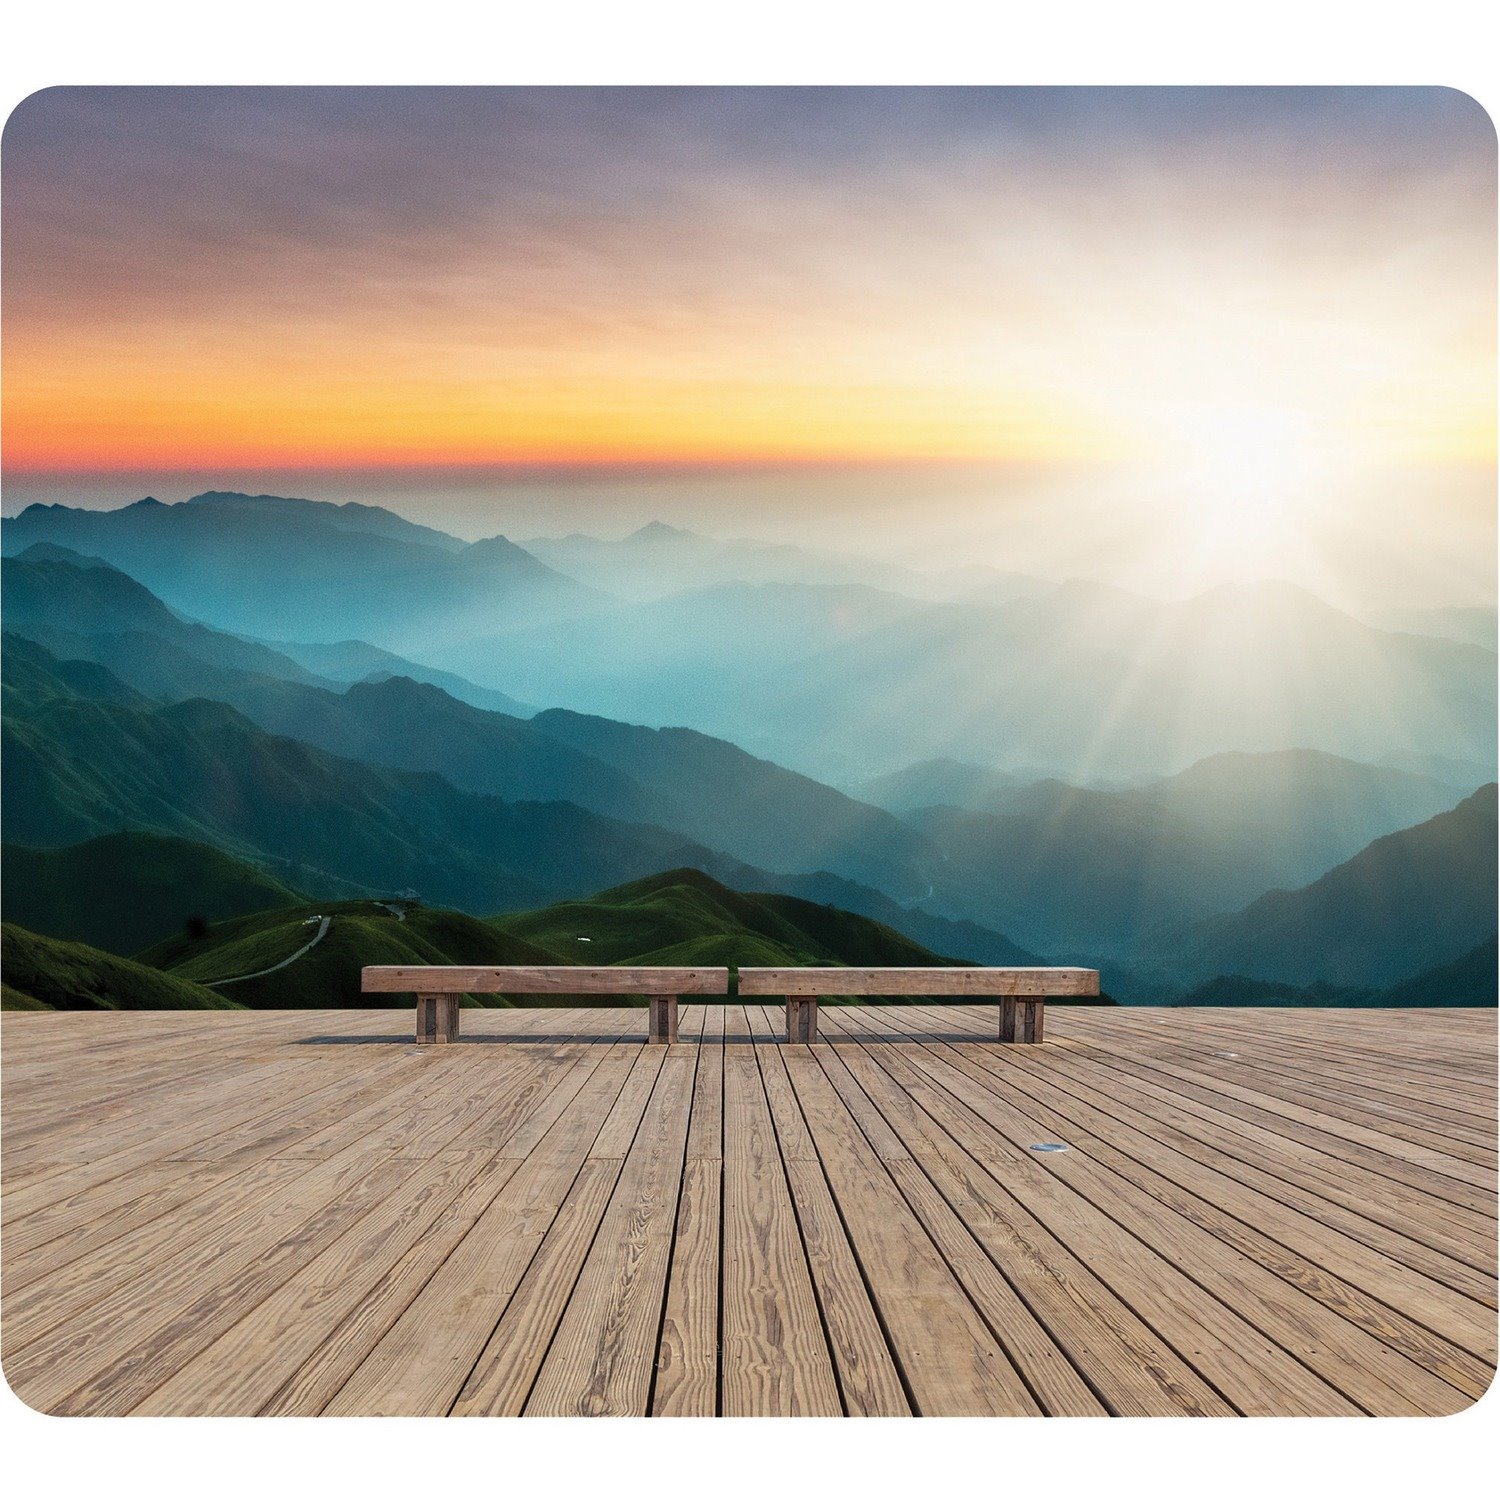 Fellowes Recycled Mouse Pad - Mountain Sunrise